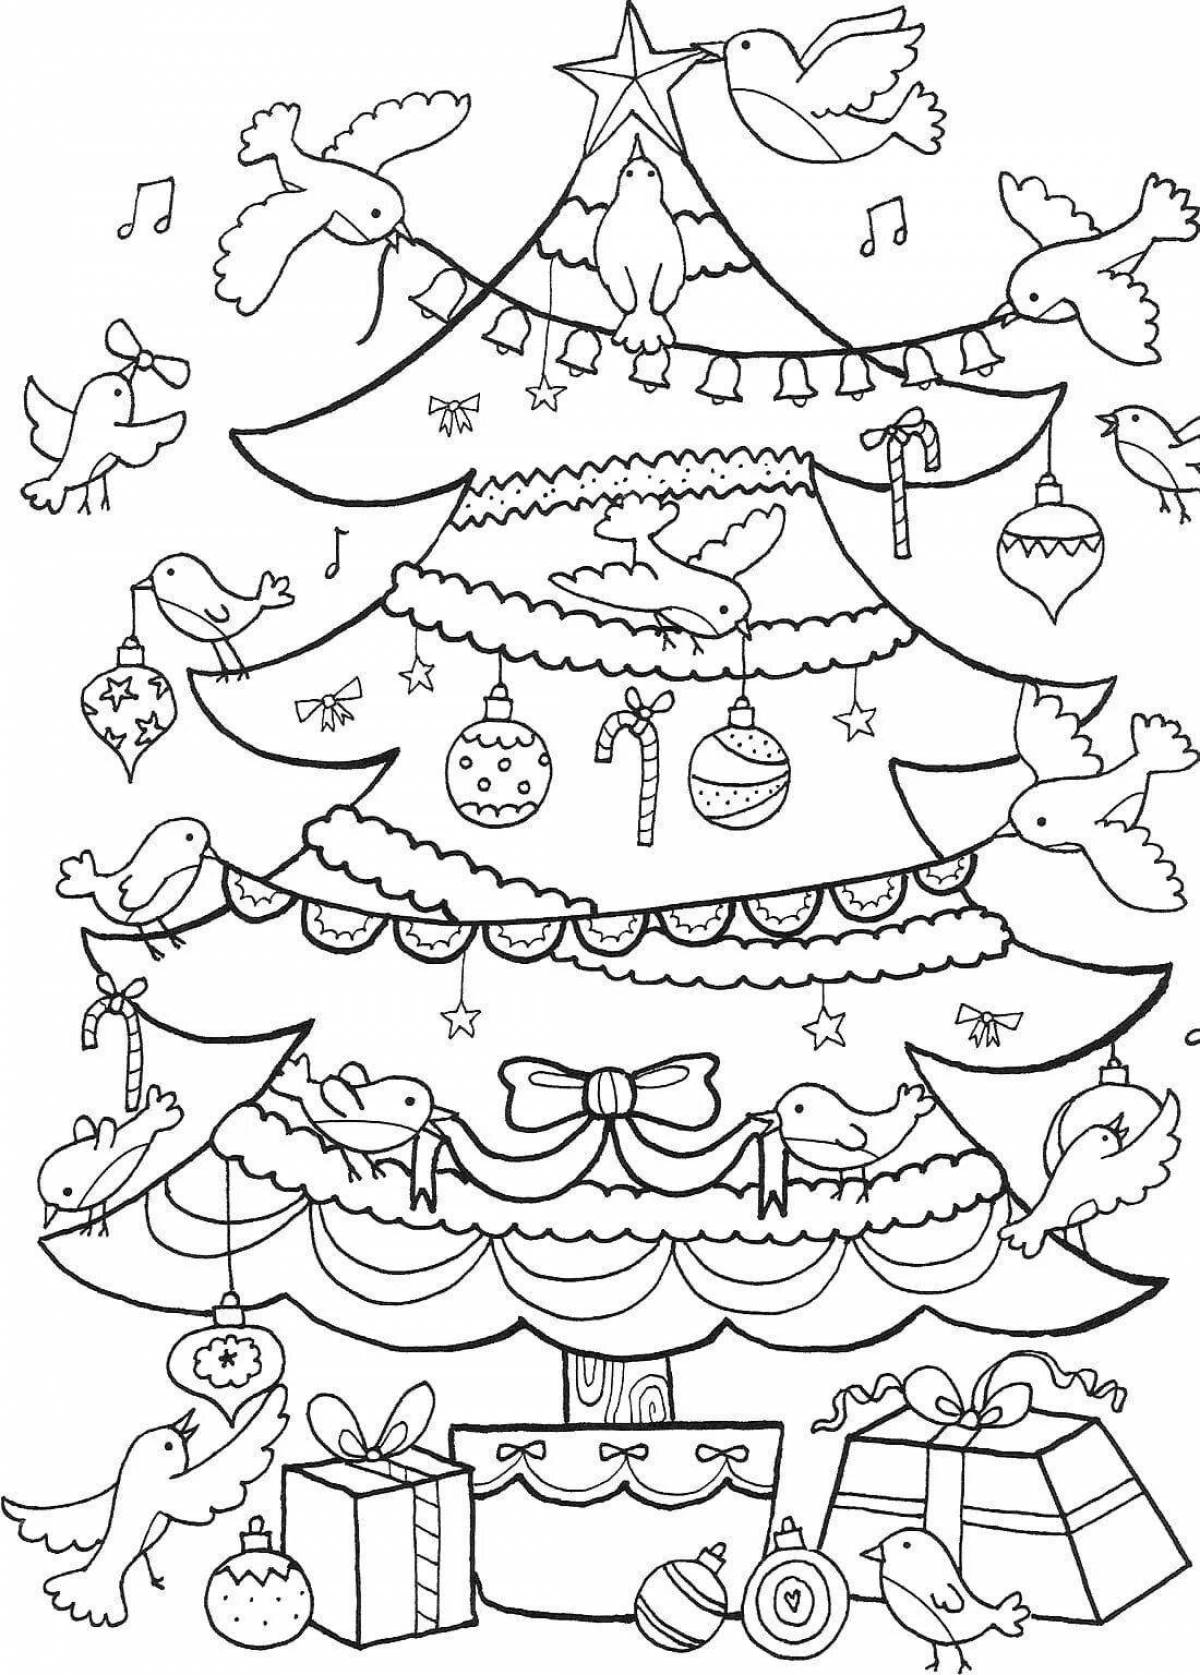 Glowing Christmas tree coloring book for 6-7 year olds